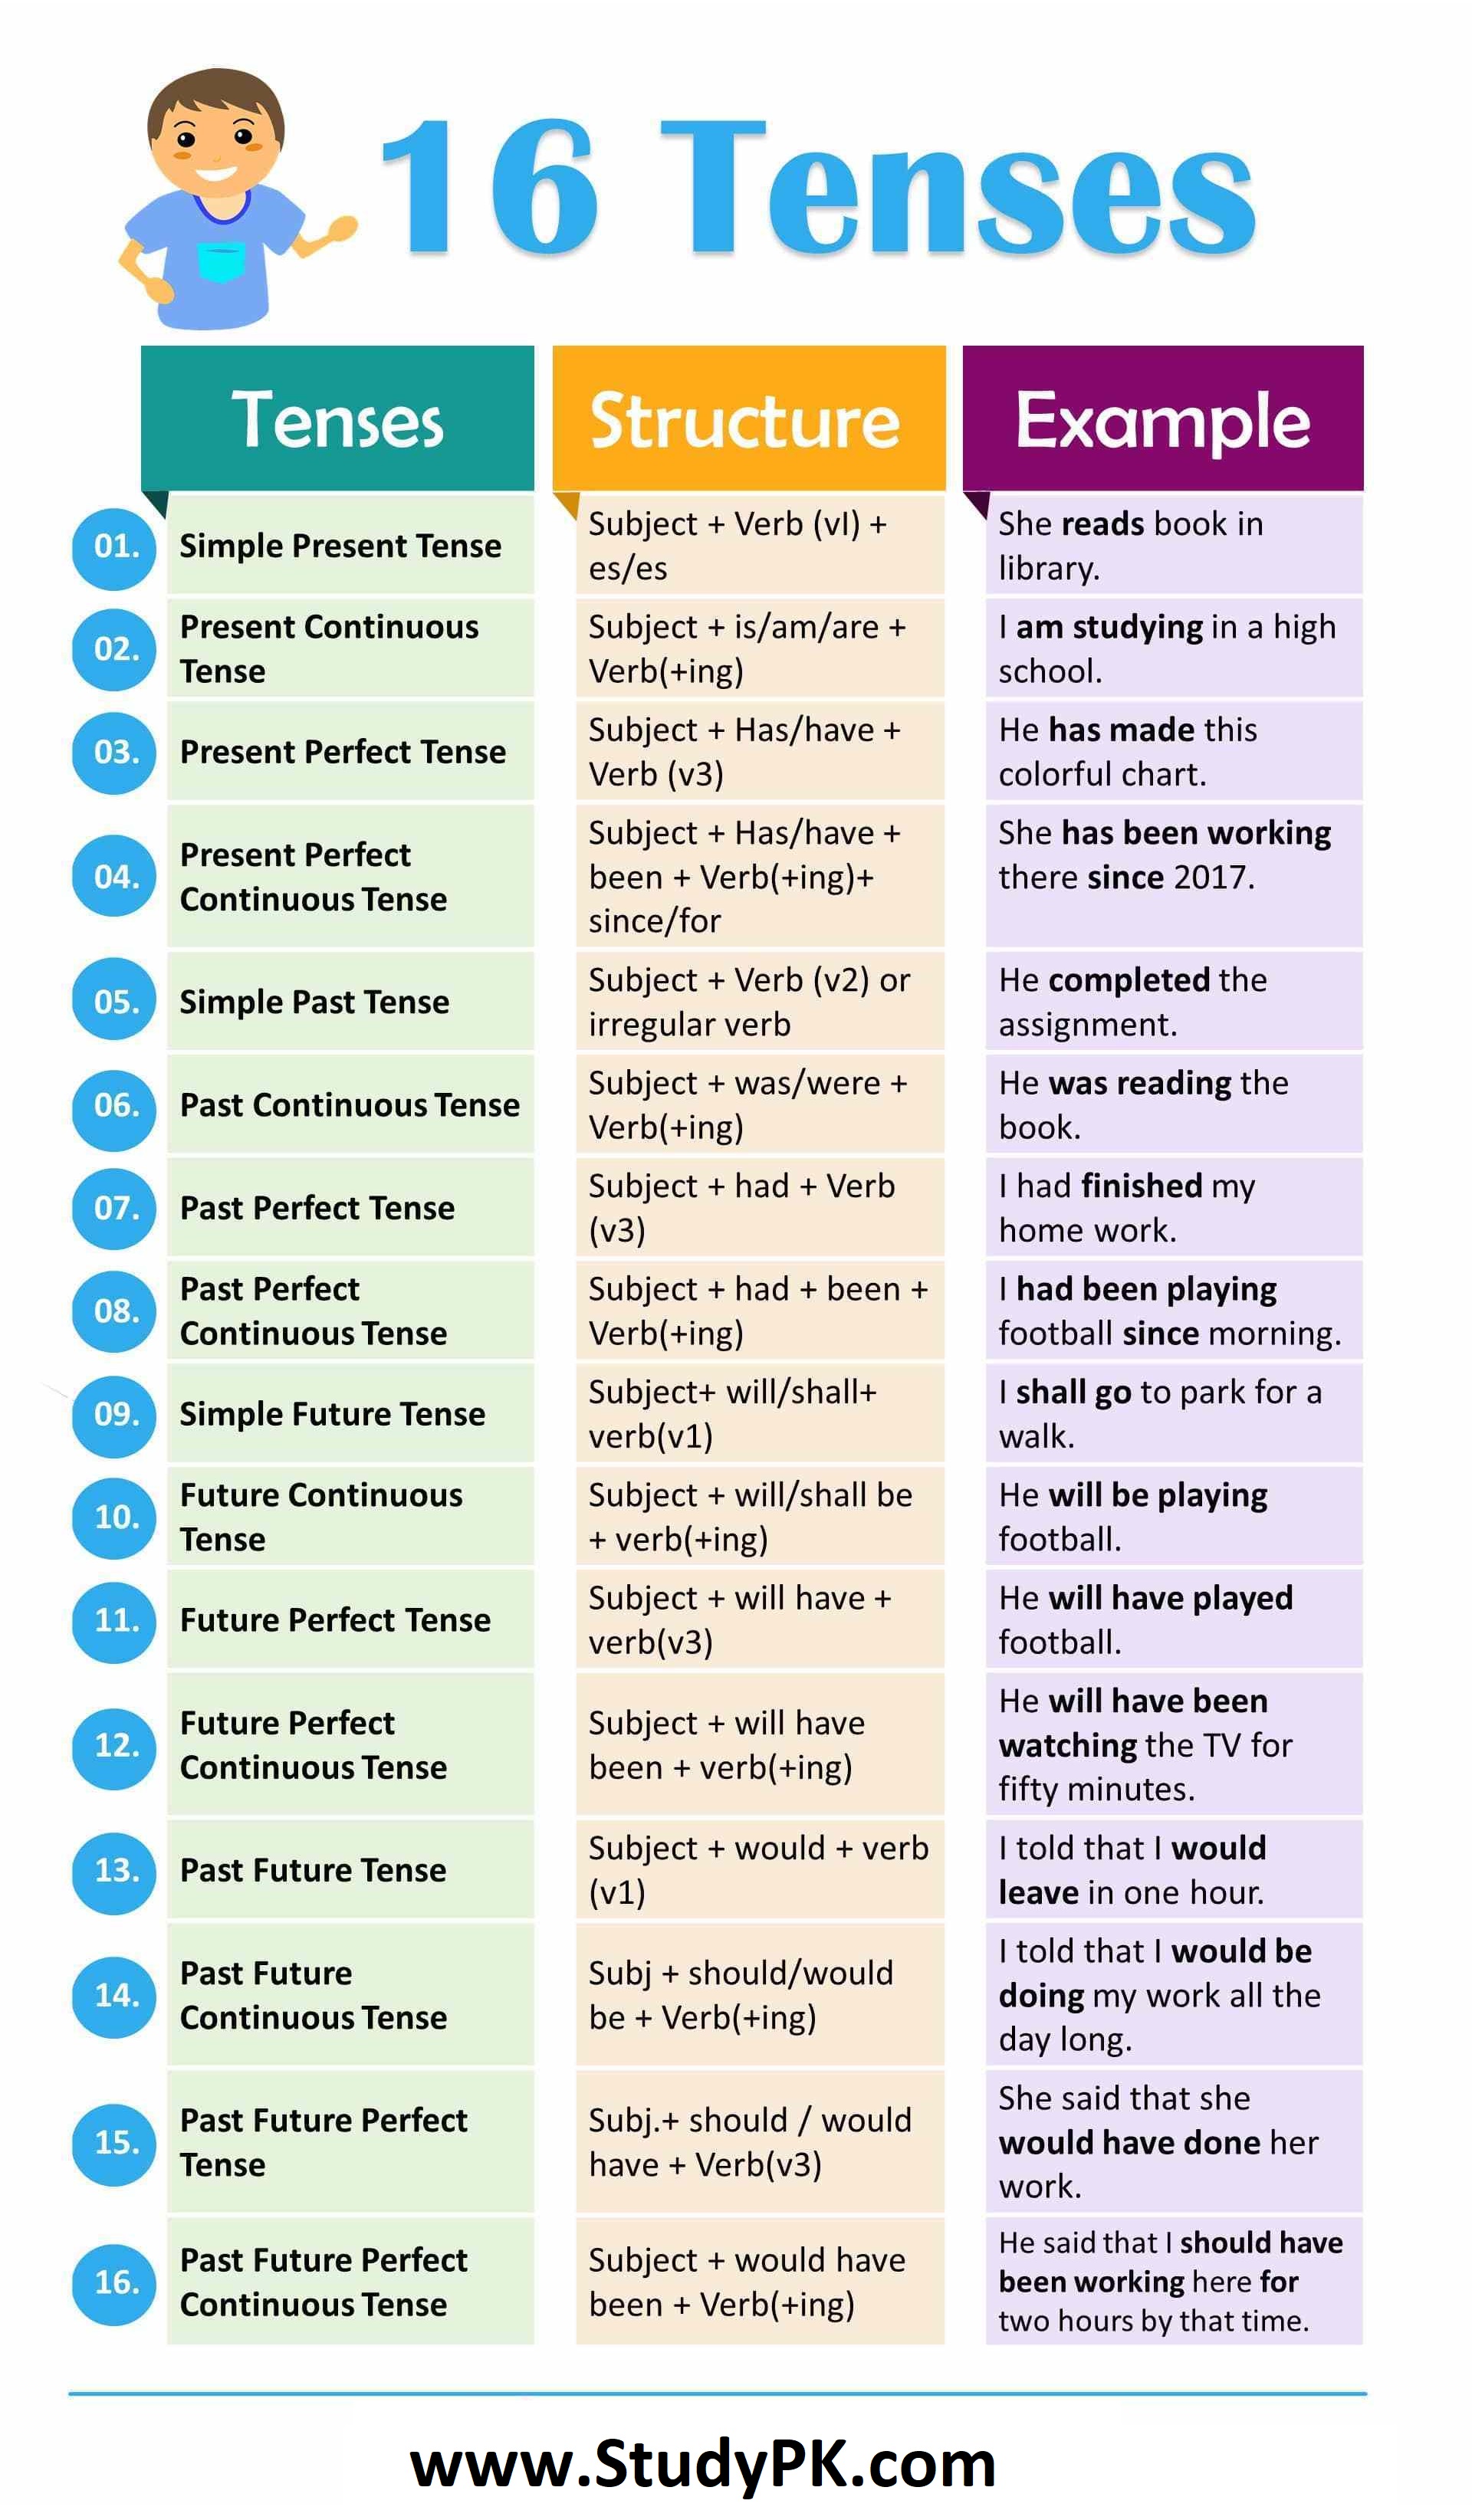 English Tenses Table With Examples Pdf | Brokeasshome.com